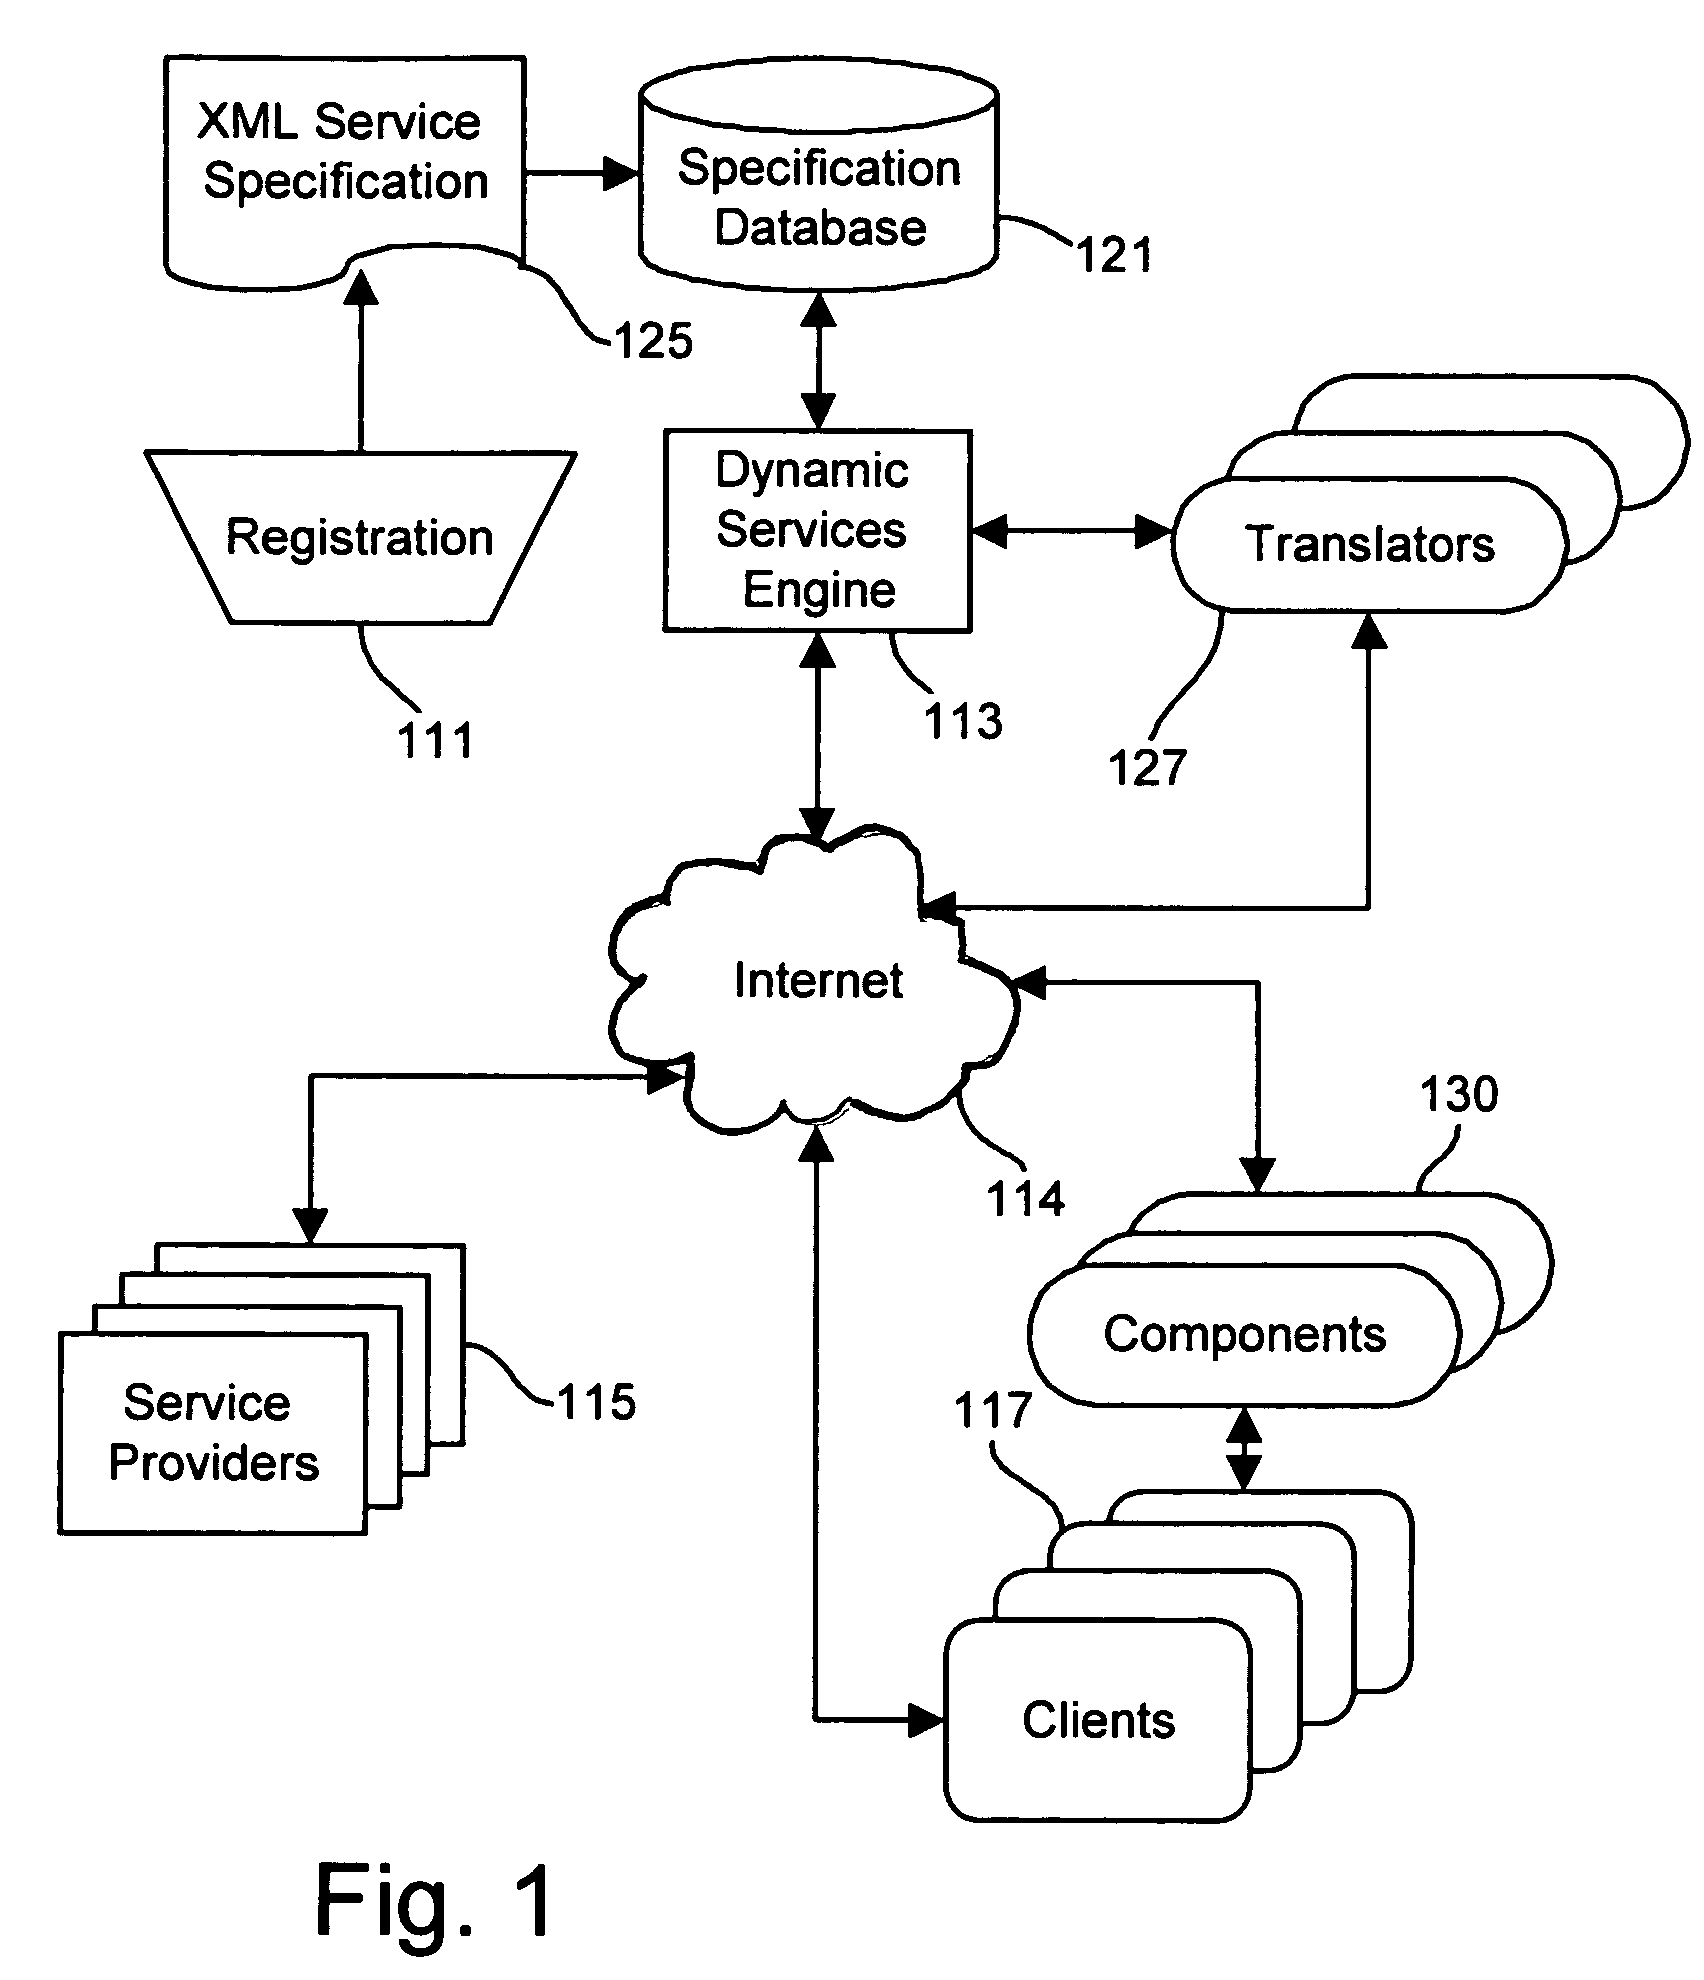 Dynamic services infrastructure for allowing programmatic access to internet and other resources